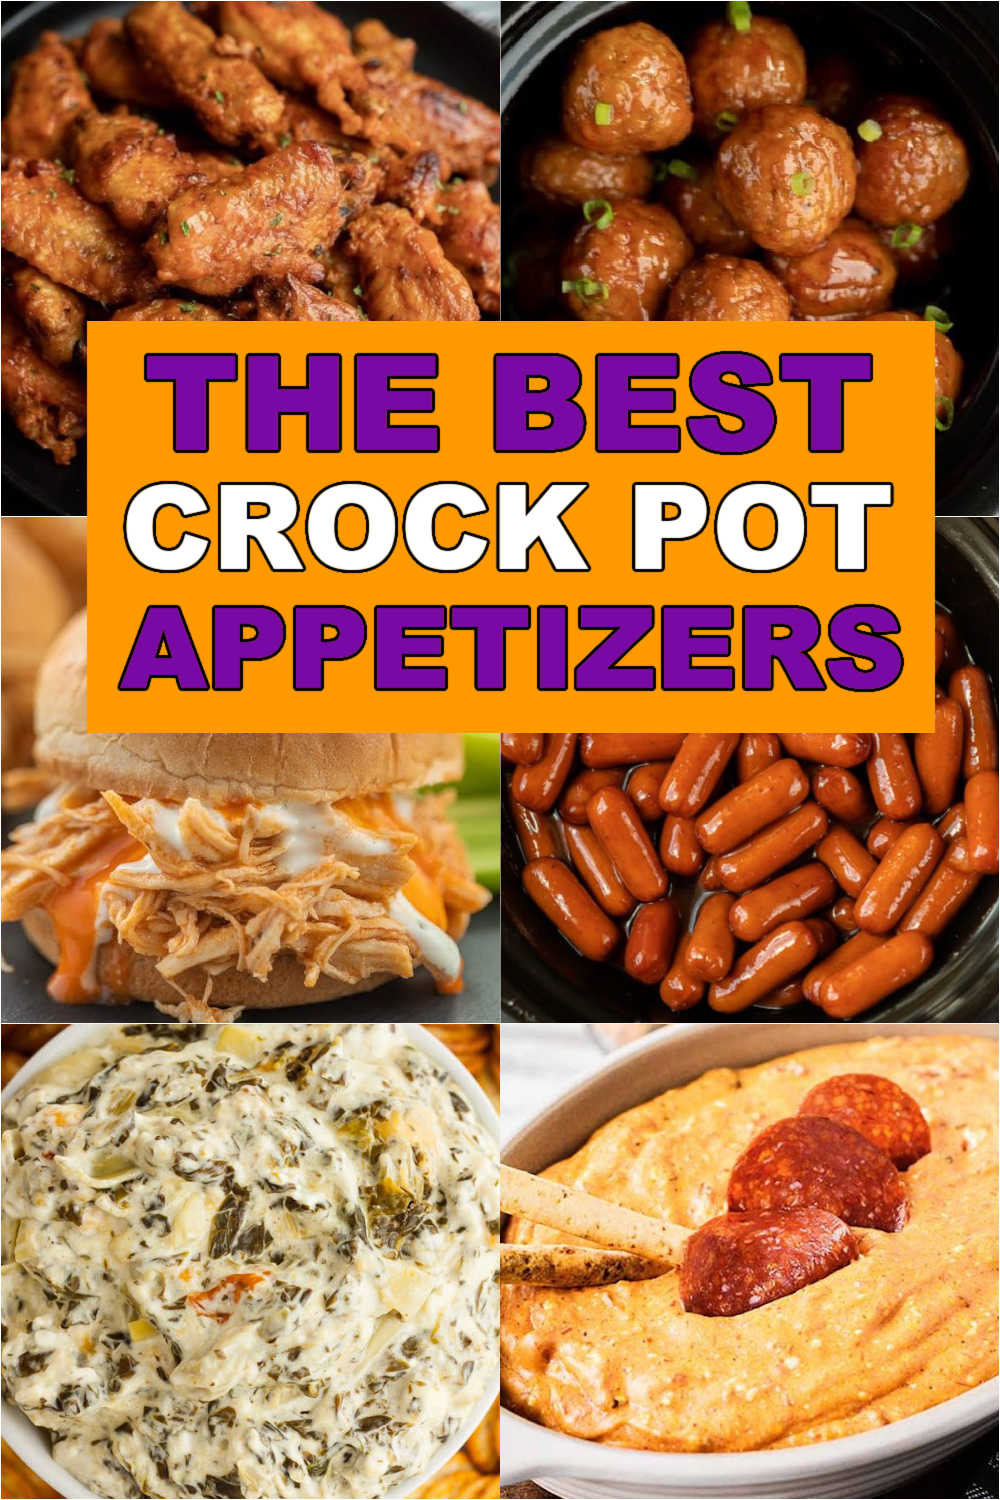 3 EASY AND DELICIOUS CROCKPOT APPETIZERS, BEST FALL APPETIZERS